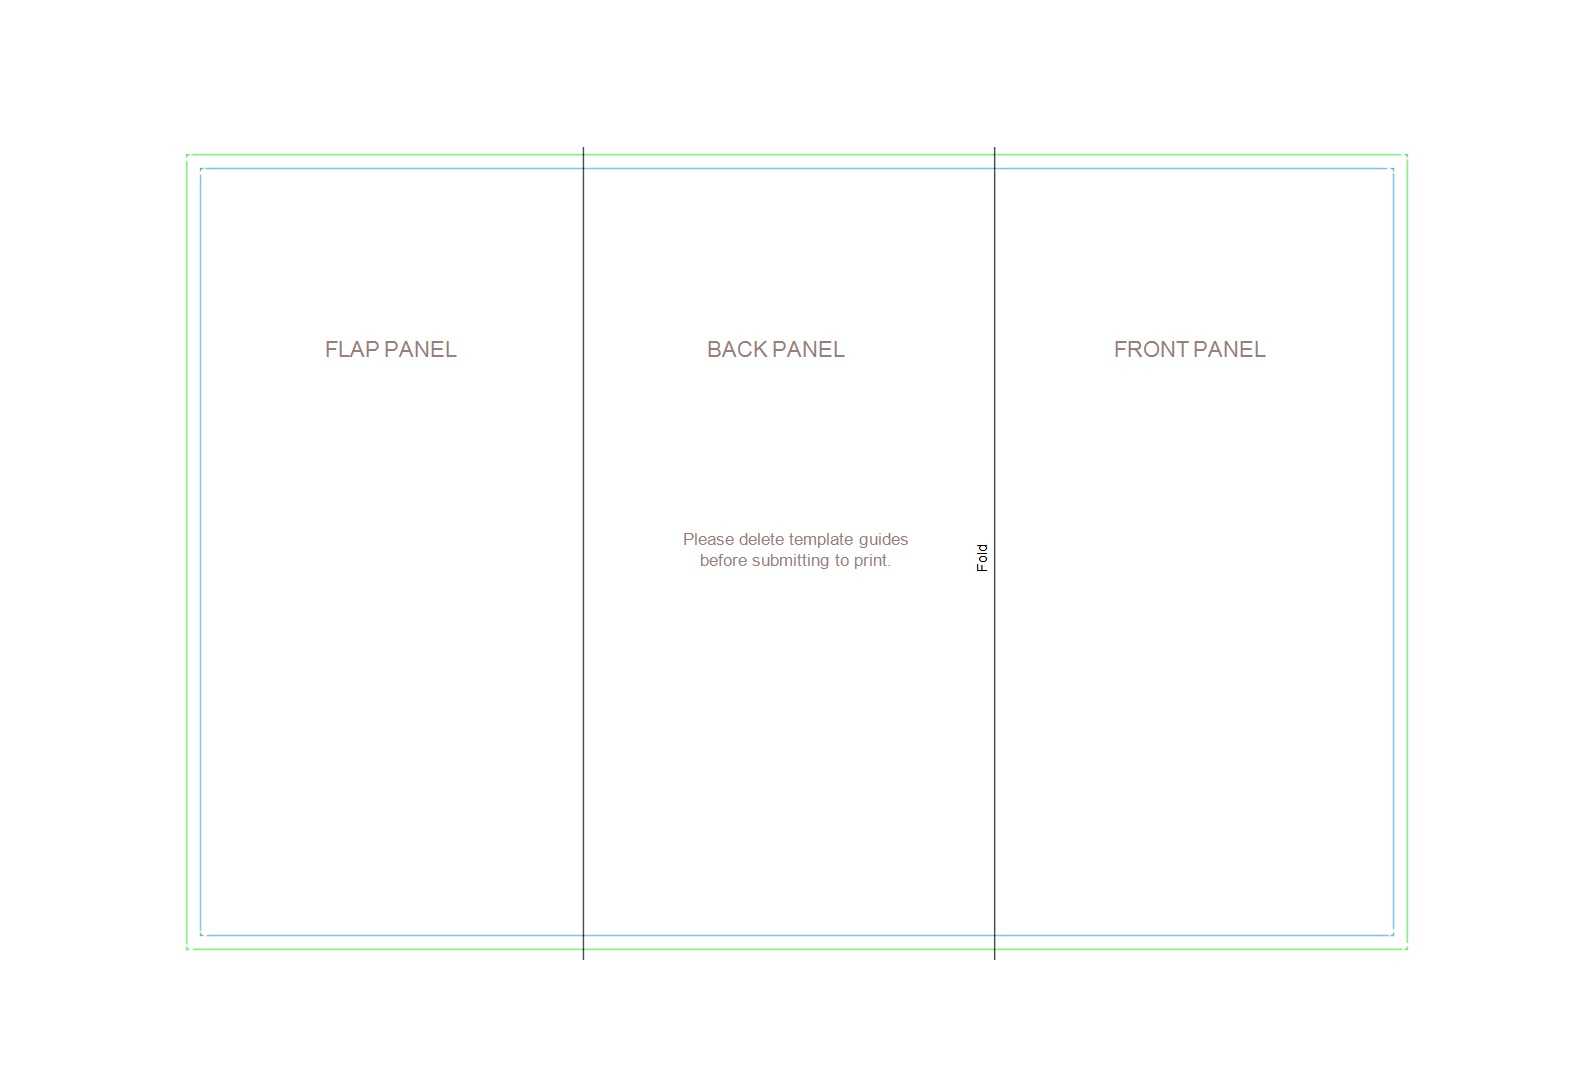 50 Free Pamphlet Templates [Word / Google Docs] ᐅ Template Lab In Brochure Template Google Drive